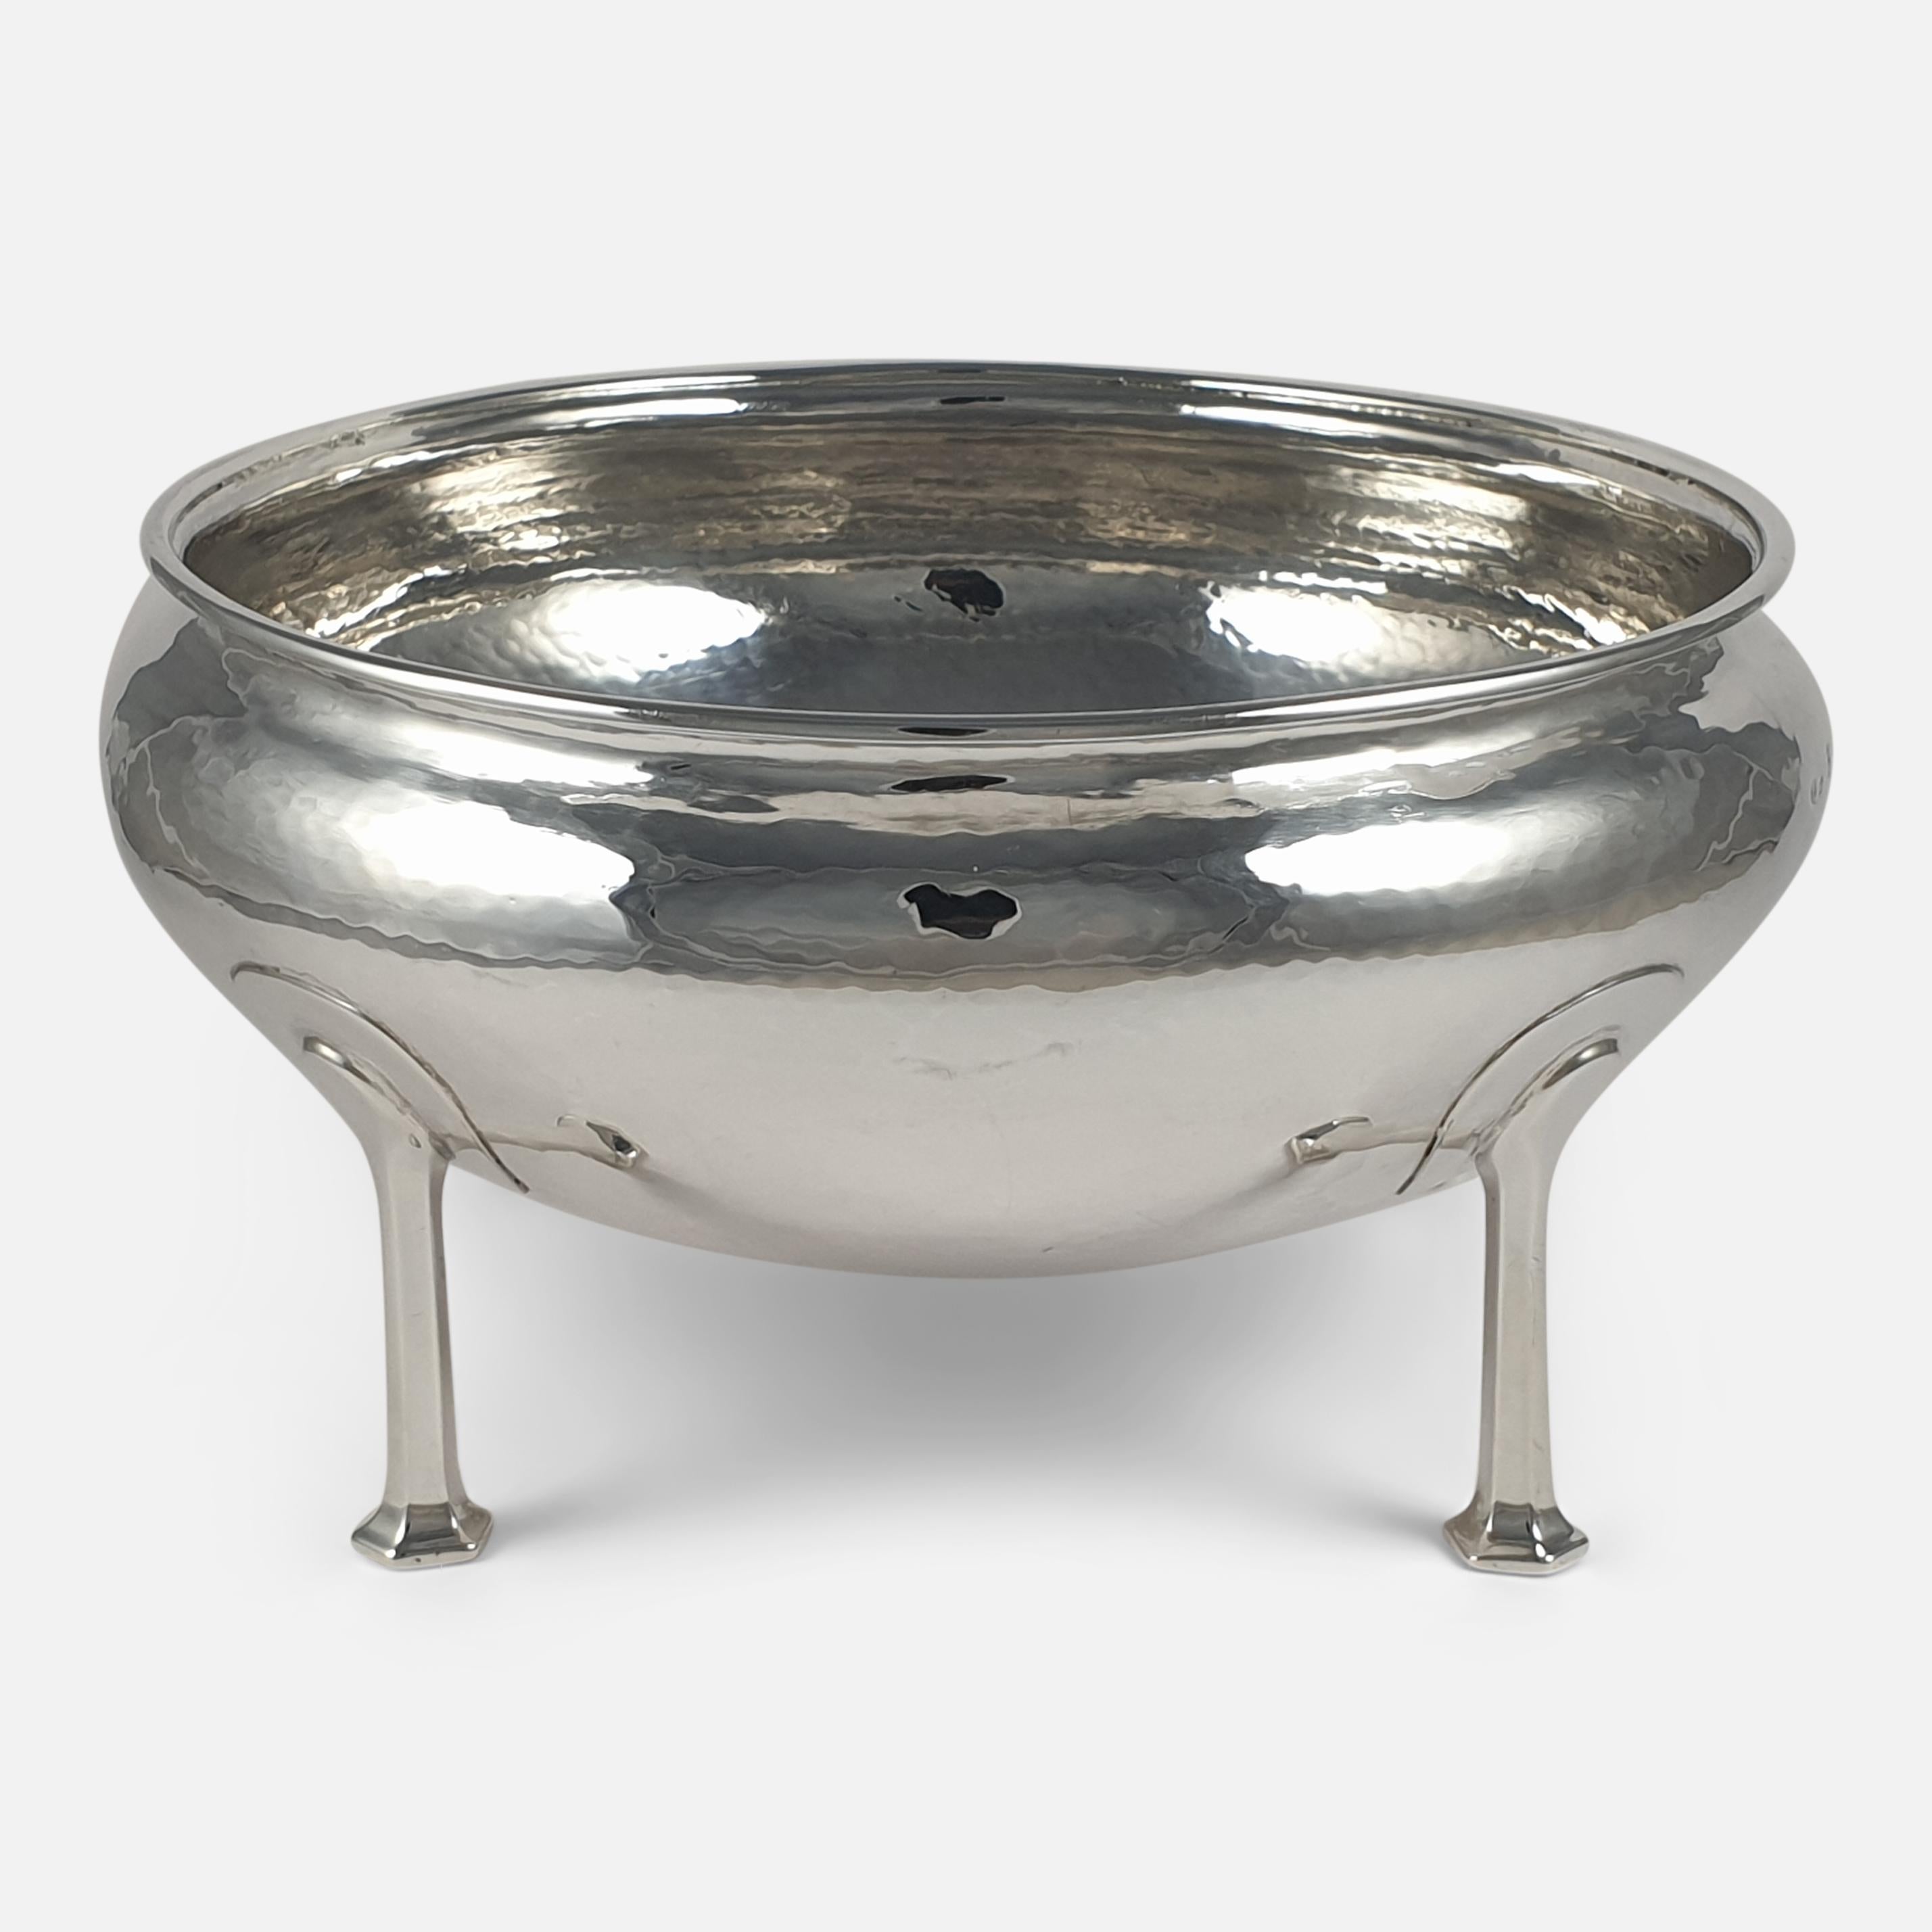 Early 20th Century Arts & Crafts Sterling Silver Hammered Bowl, A. E. Jones, Birmingham, 1912 For Sale